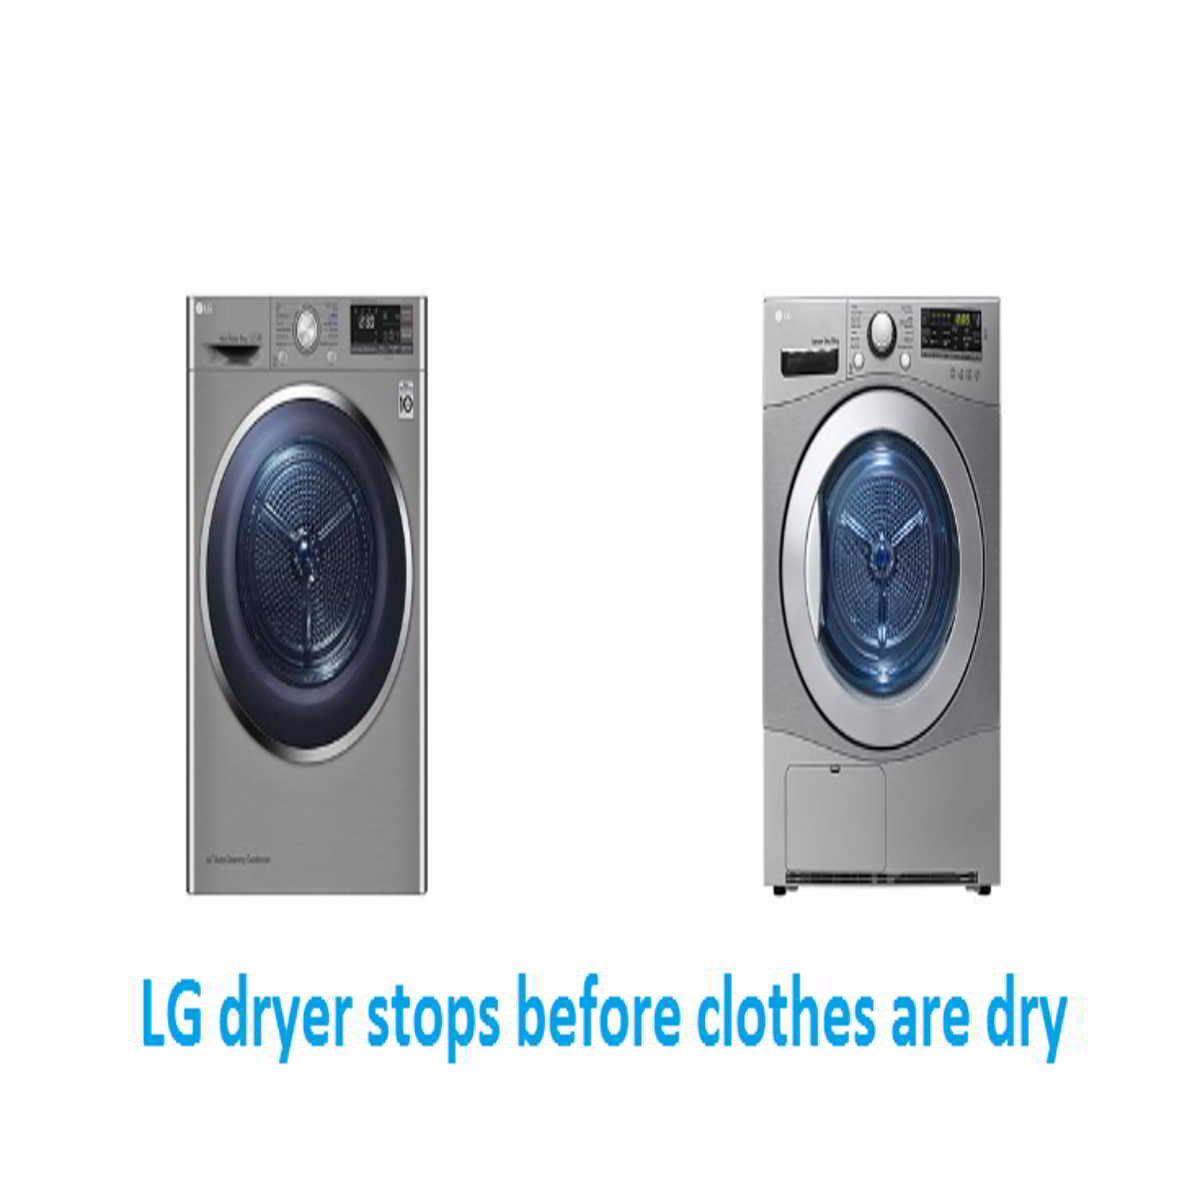 LG dryer stops before clothes are dry